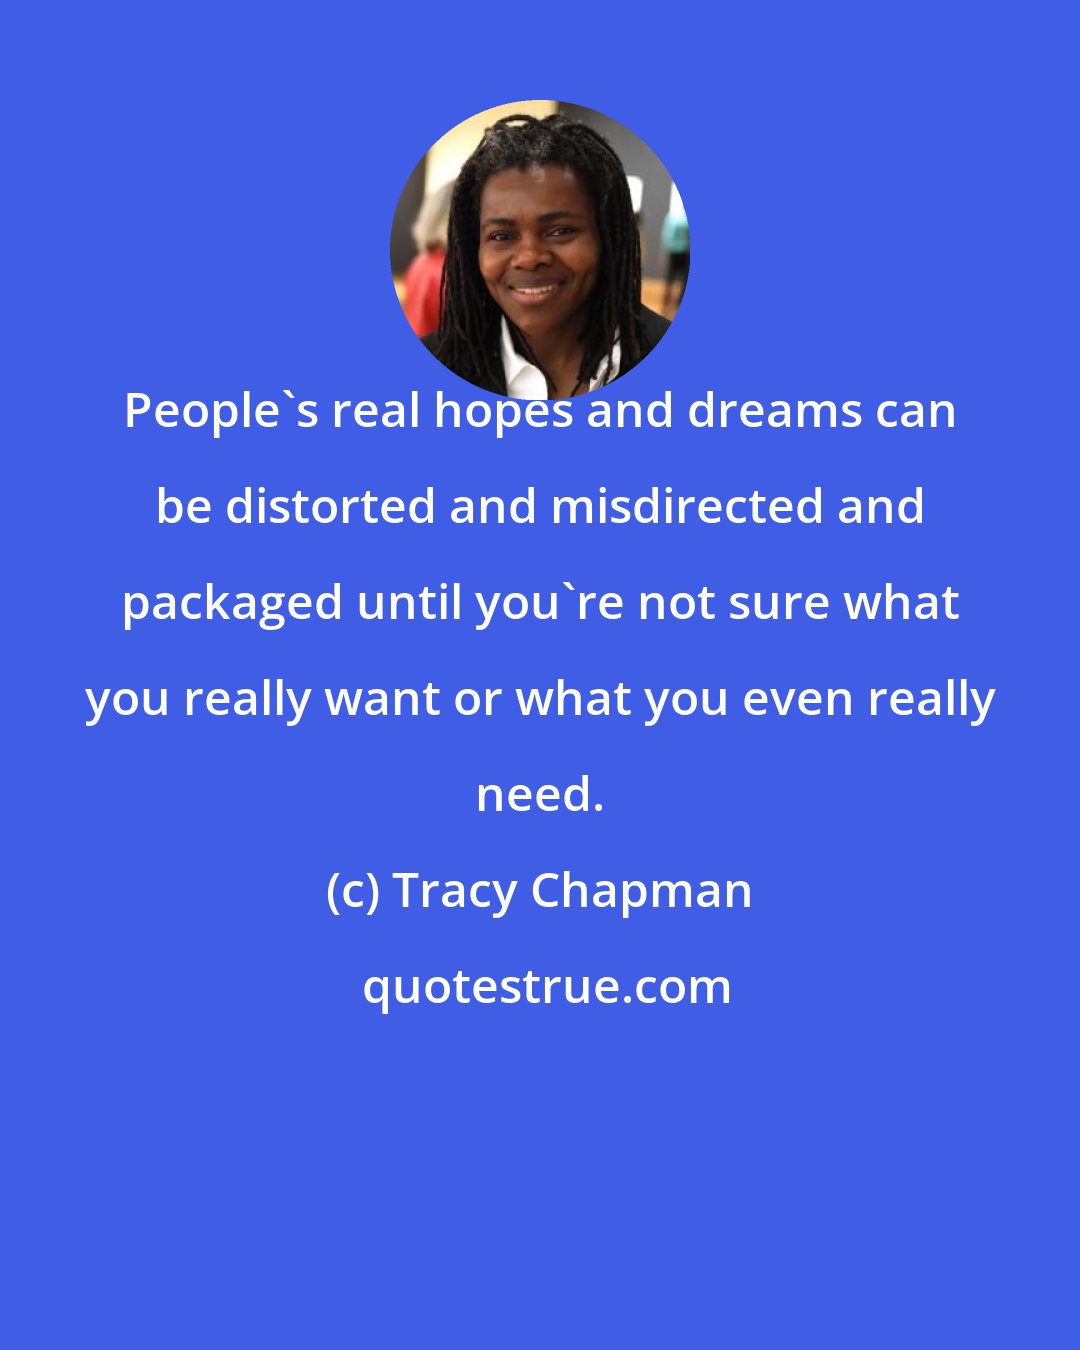 Tracy Chapman: People's real hopes and dreams can be distorted and misdirected and packaged until you're not sure what you really want or what you even really need.